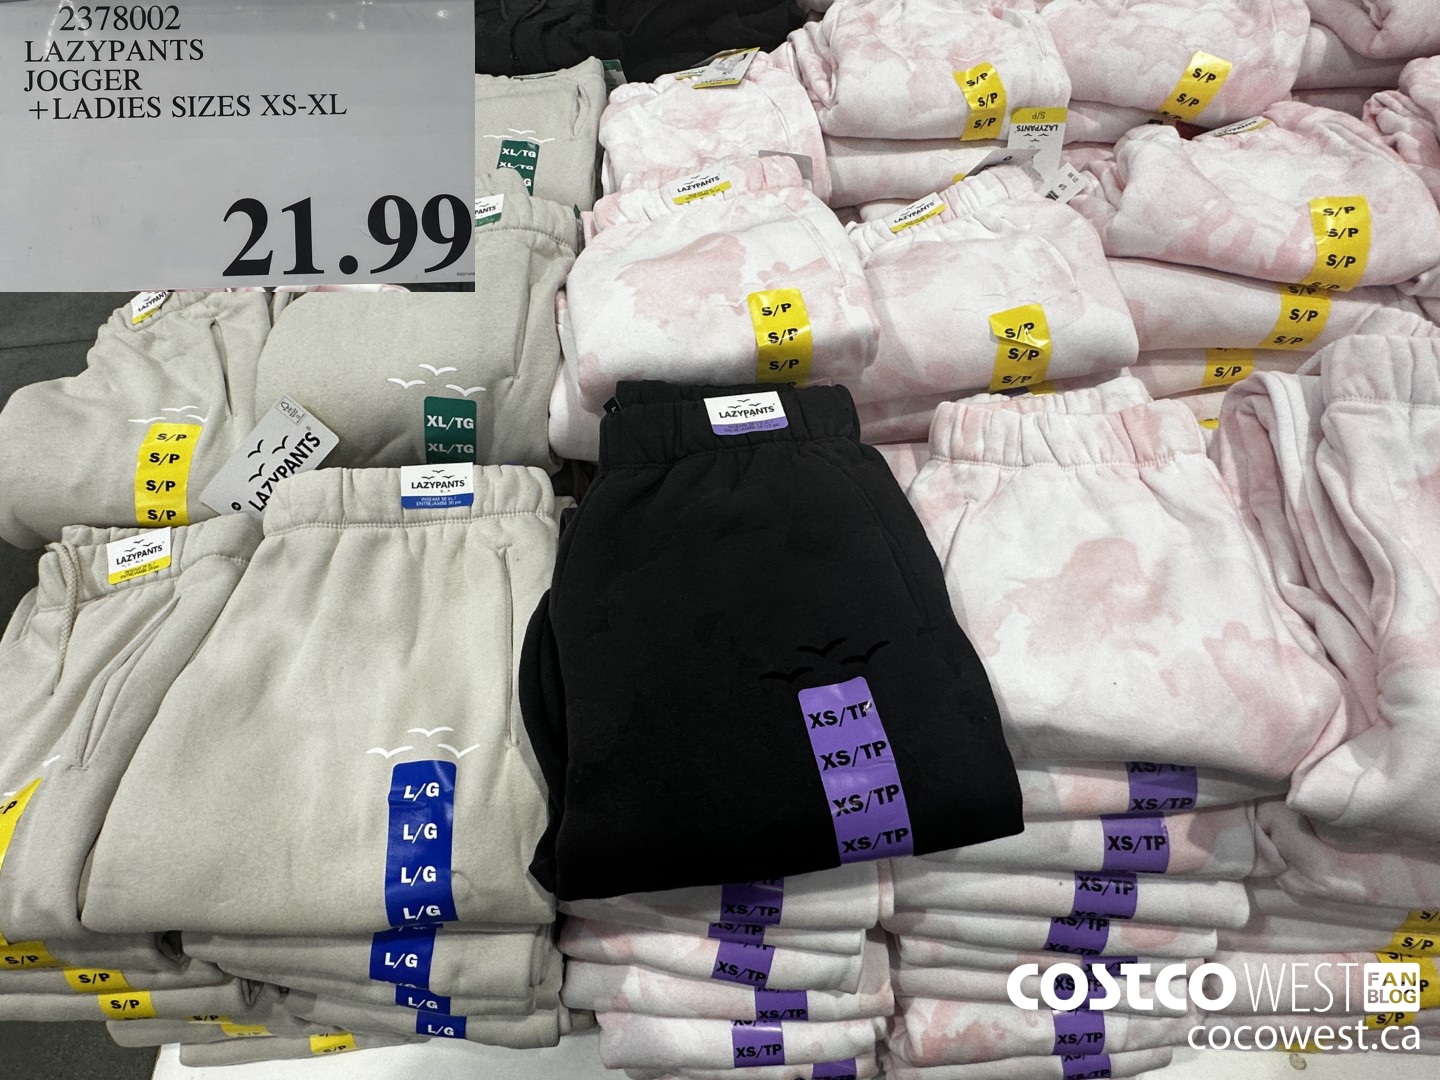 Lazypants at Costco #lazypants #costcofinds #clothes #shopping #fyp